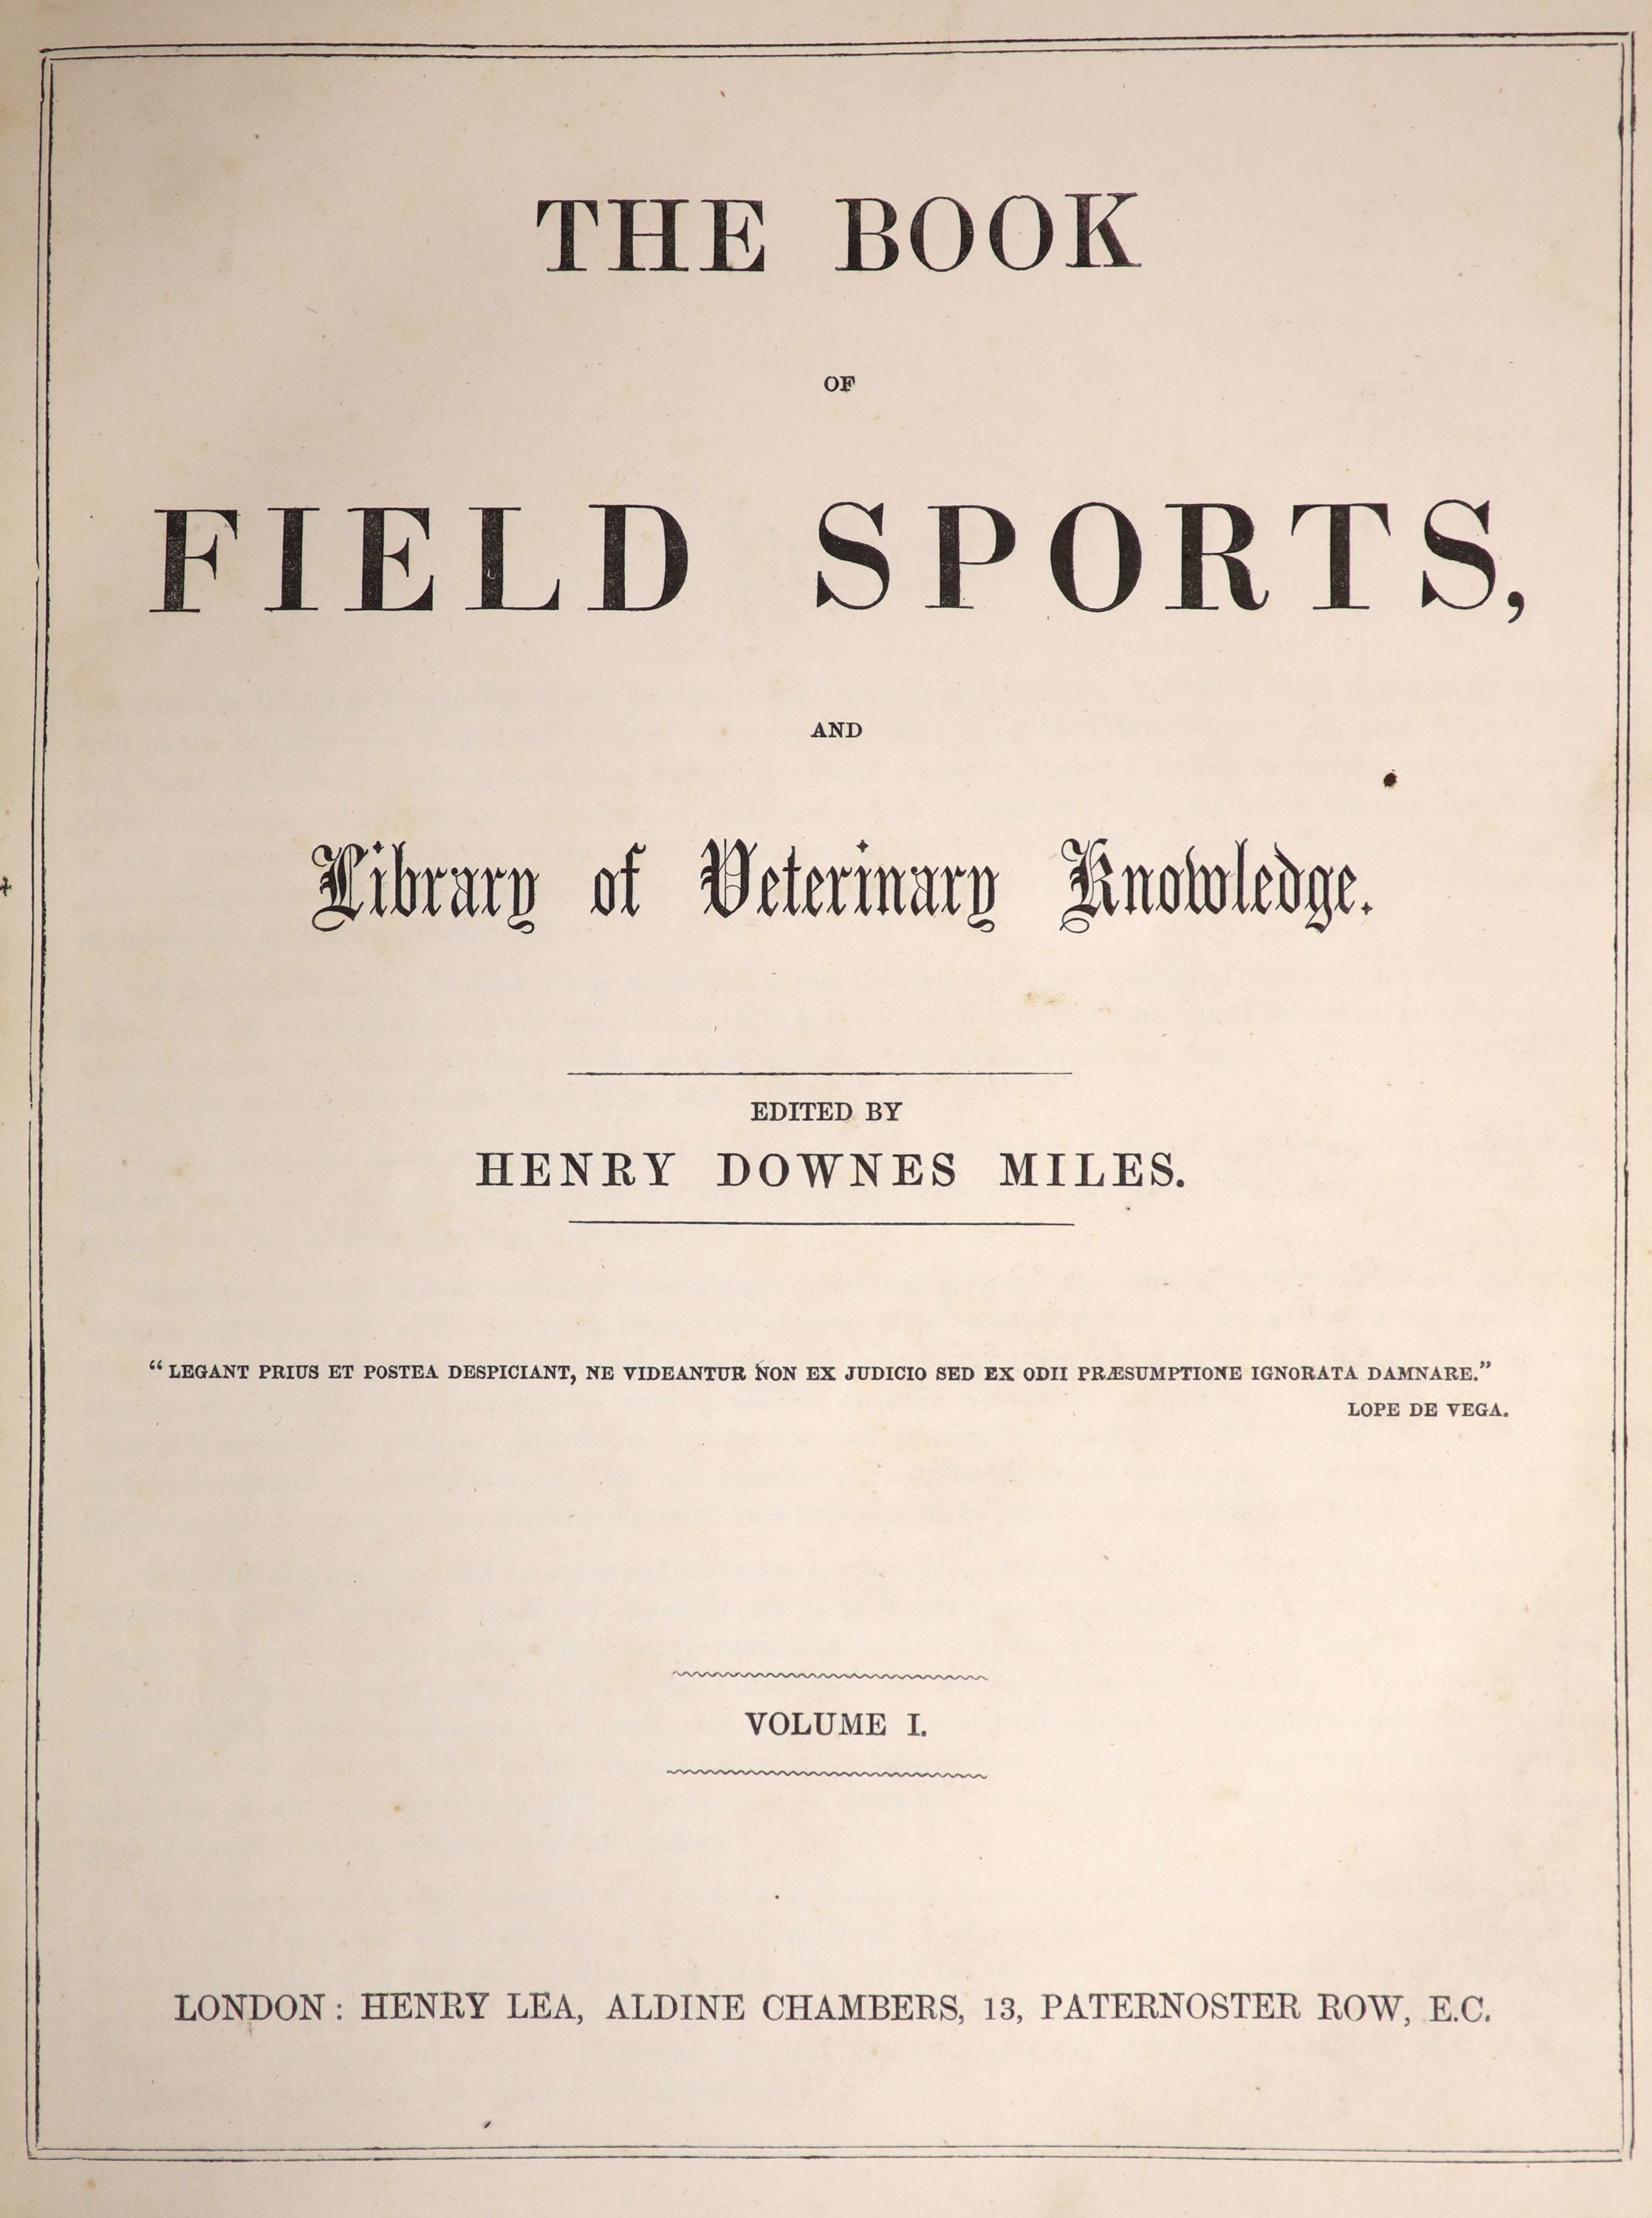 Miles, Henry Downes (editor) - The Book of Field Sports, and Library of Veterinary Knowledge. 2 Vols. Complete with 74 plates (6 of which are coloured) and numerous text illus. Half morocco and cloth, gilt ruled and pane